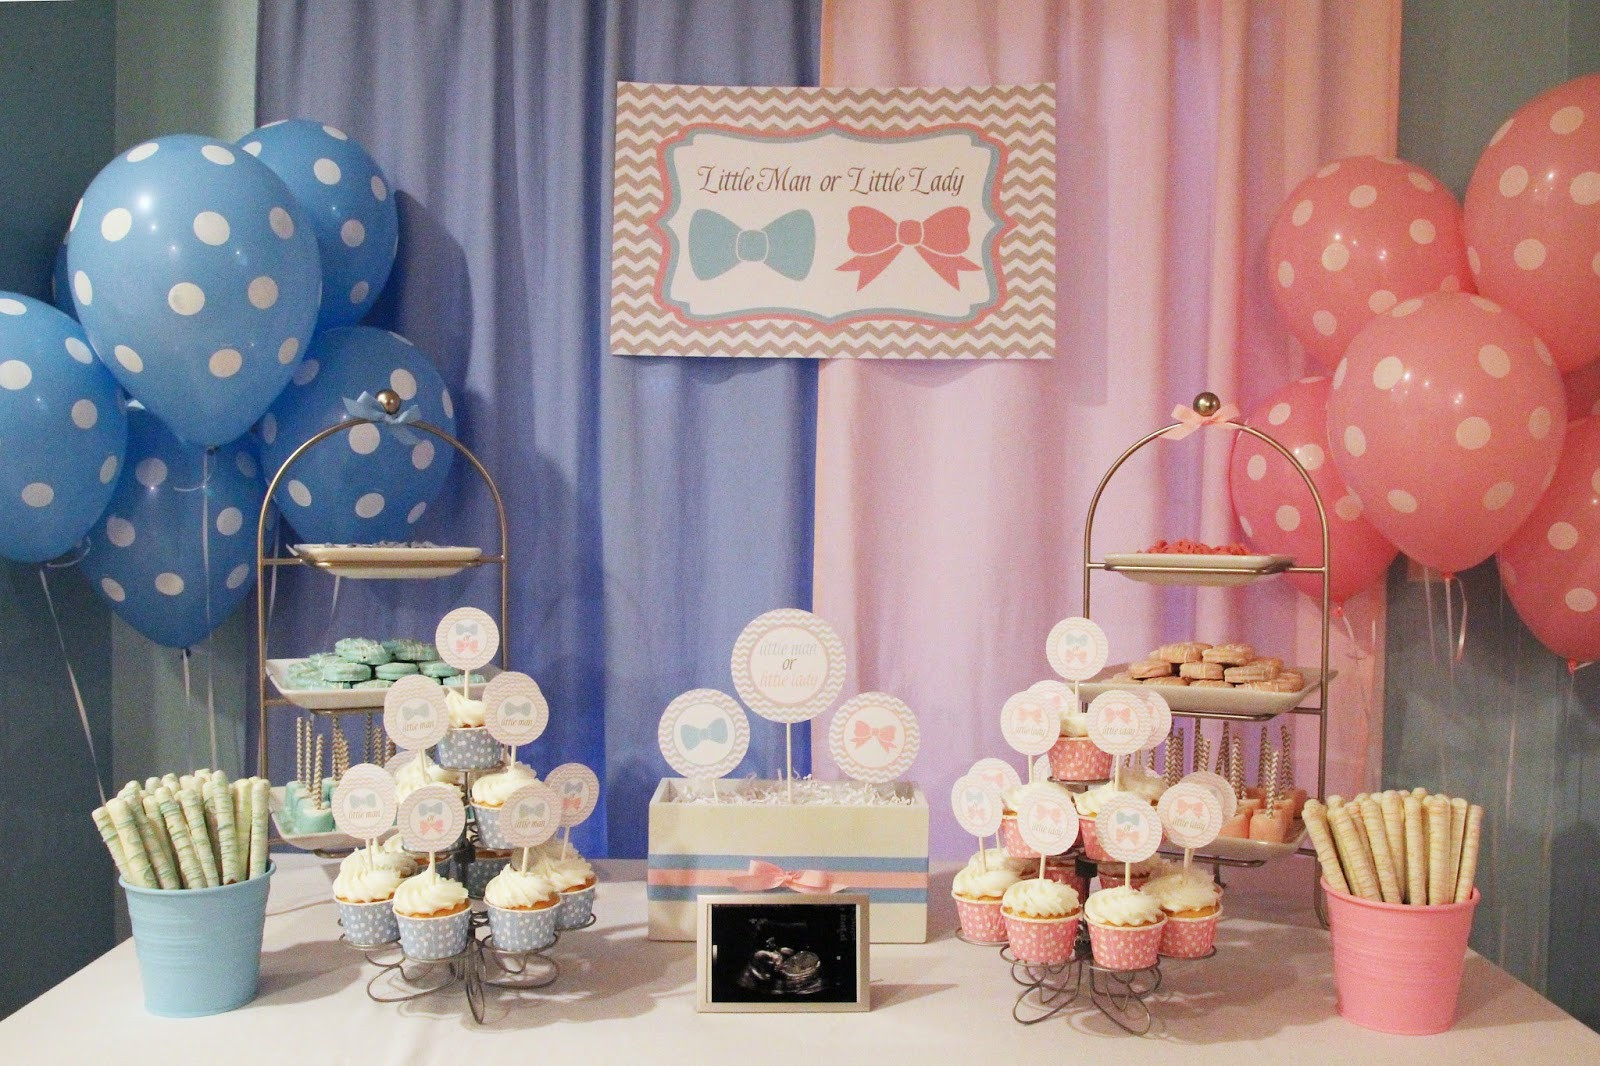 Small Gender Reveal Party Ideas
 5M Creations Gender Reveal Party Little Man or Little Lady